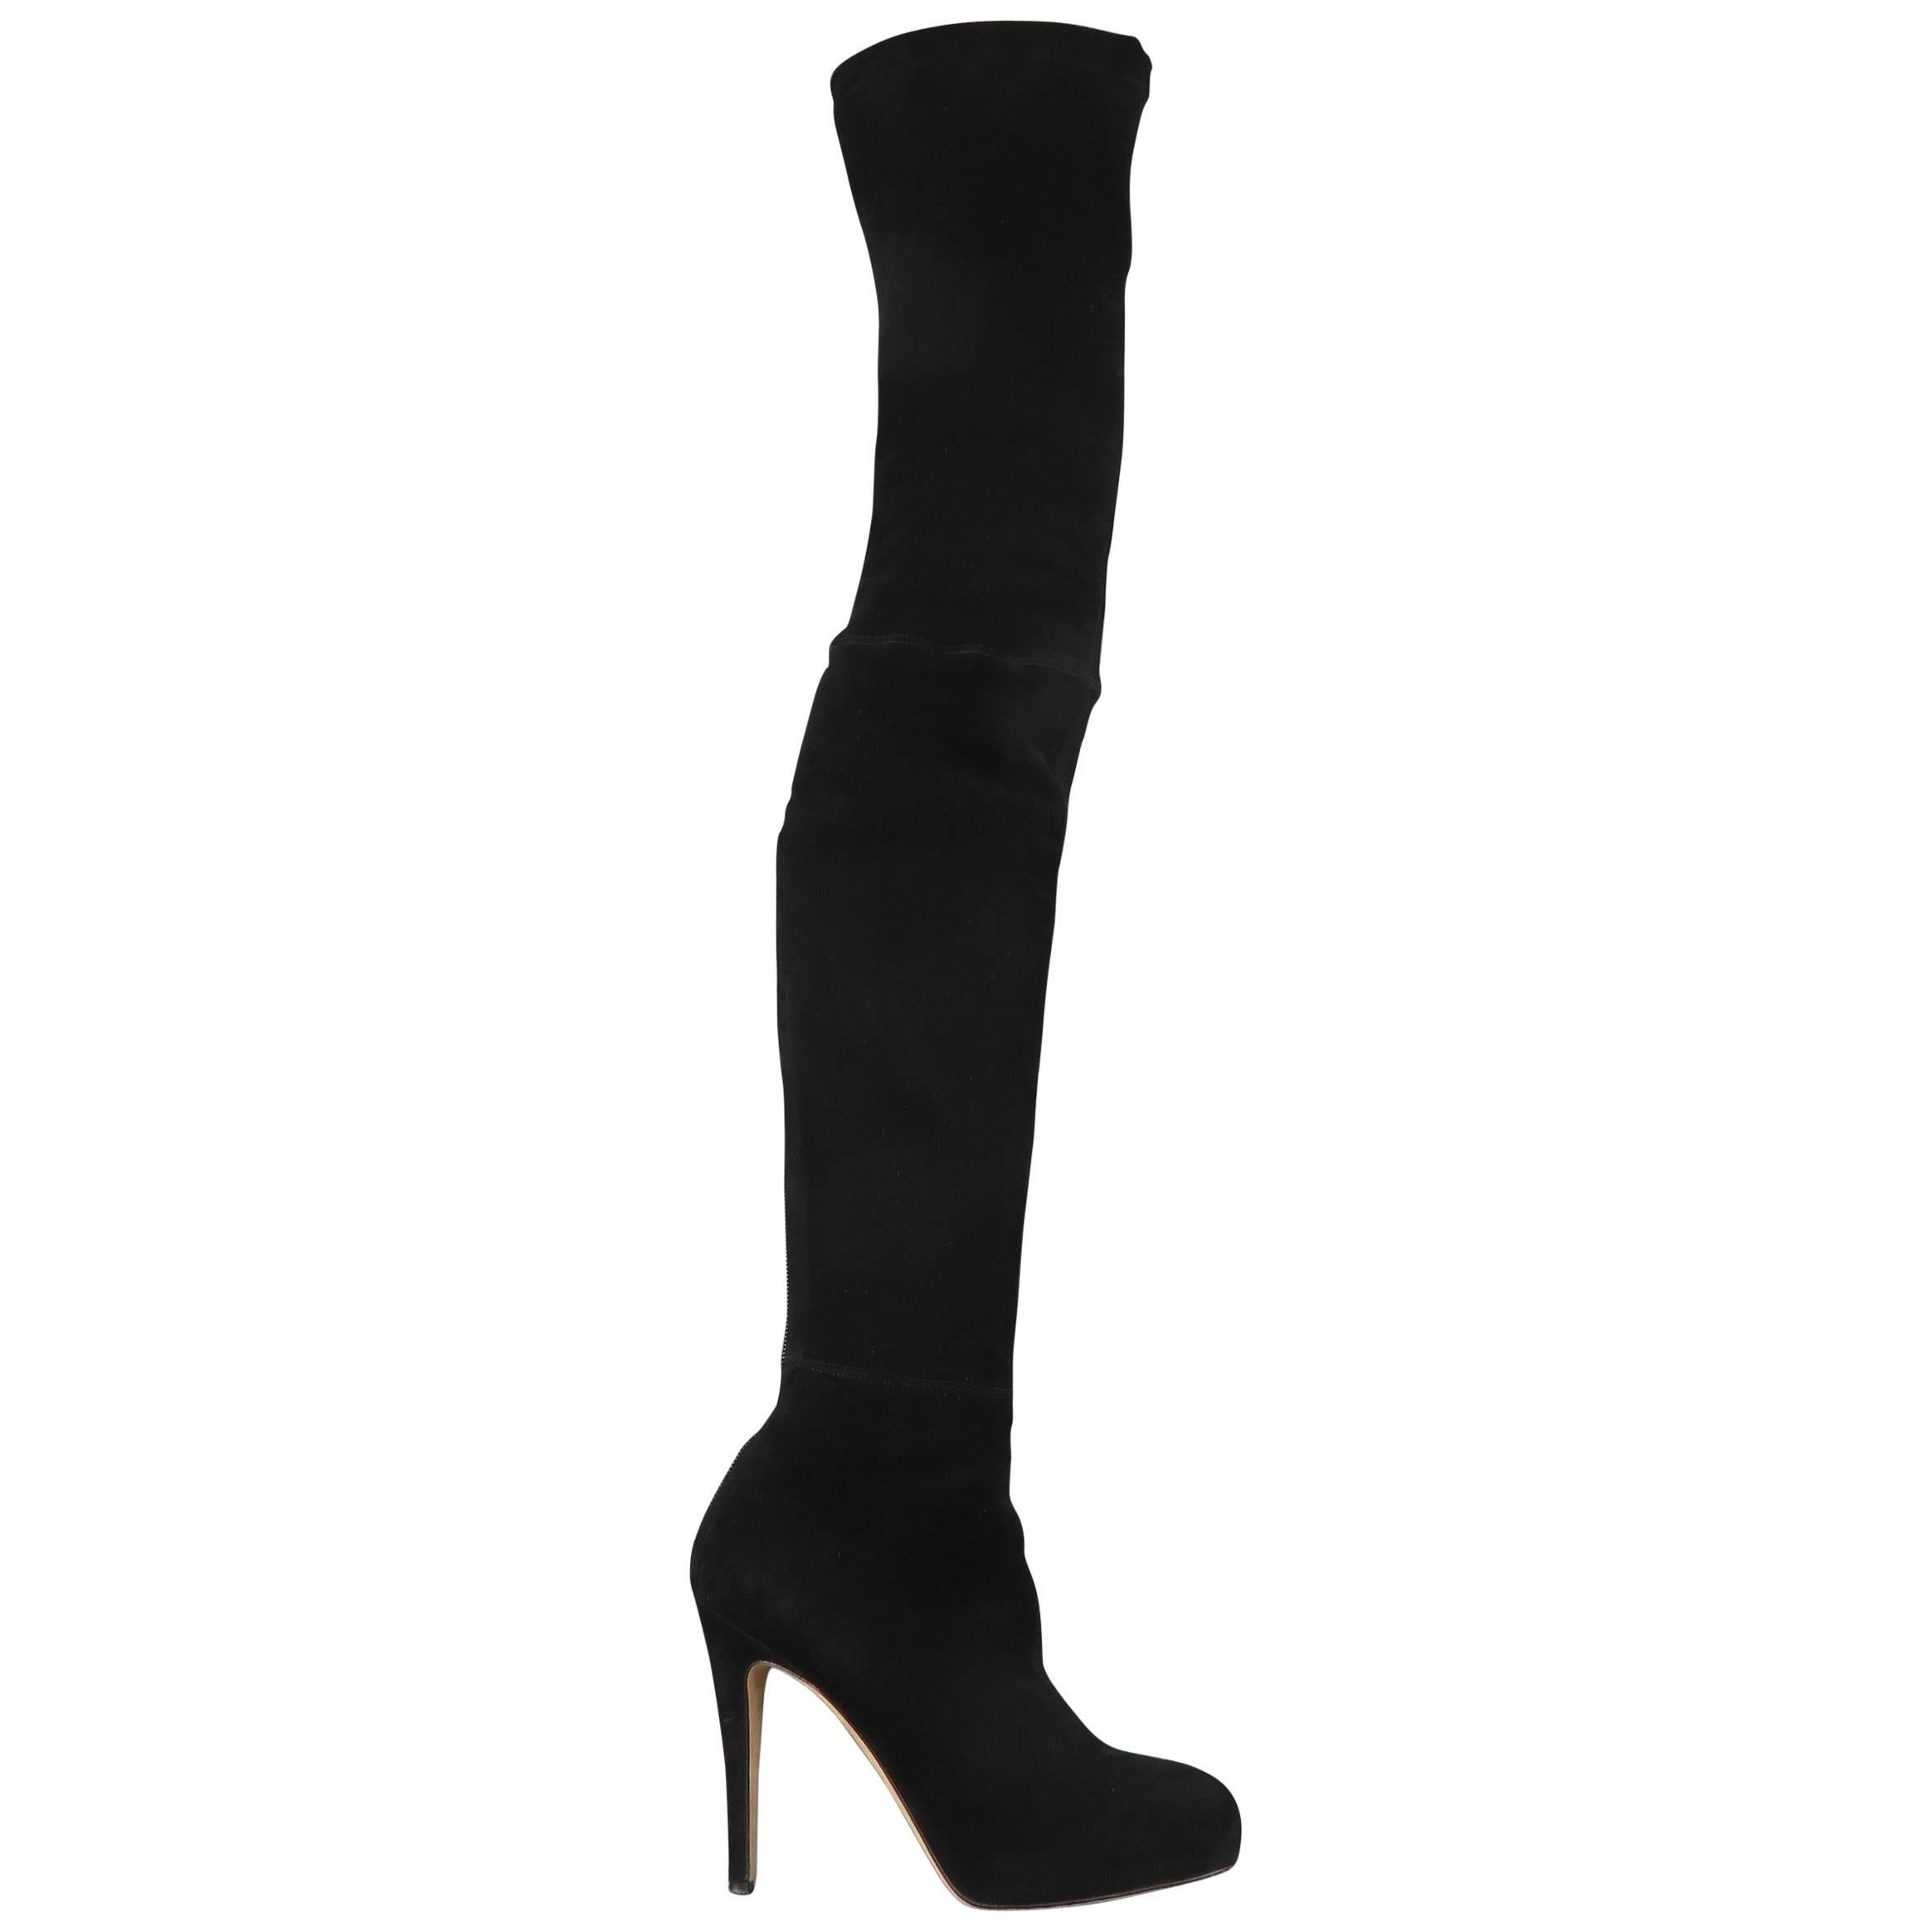 BRIAN ATWOOD Size 8.5 Black Suede Thigh High Platform Boots